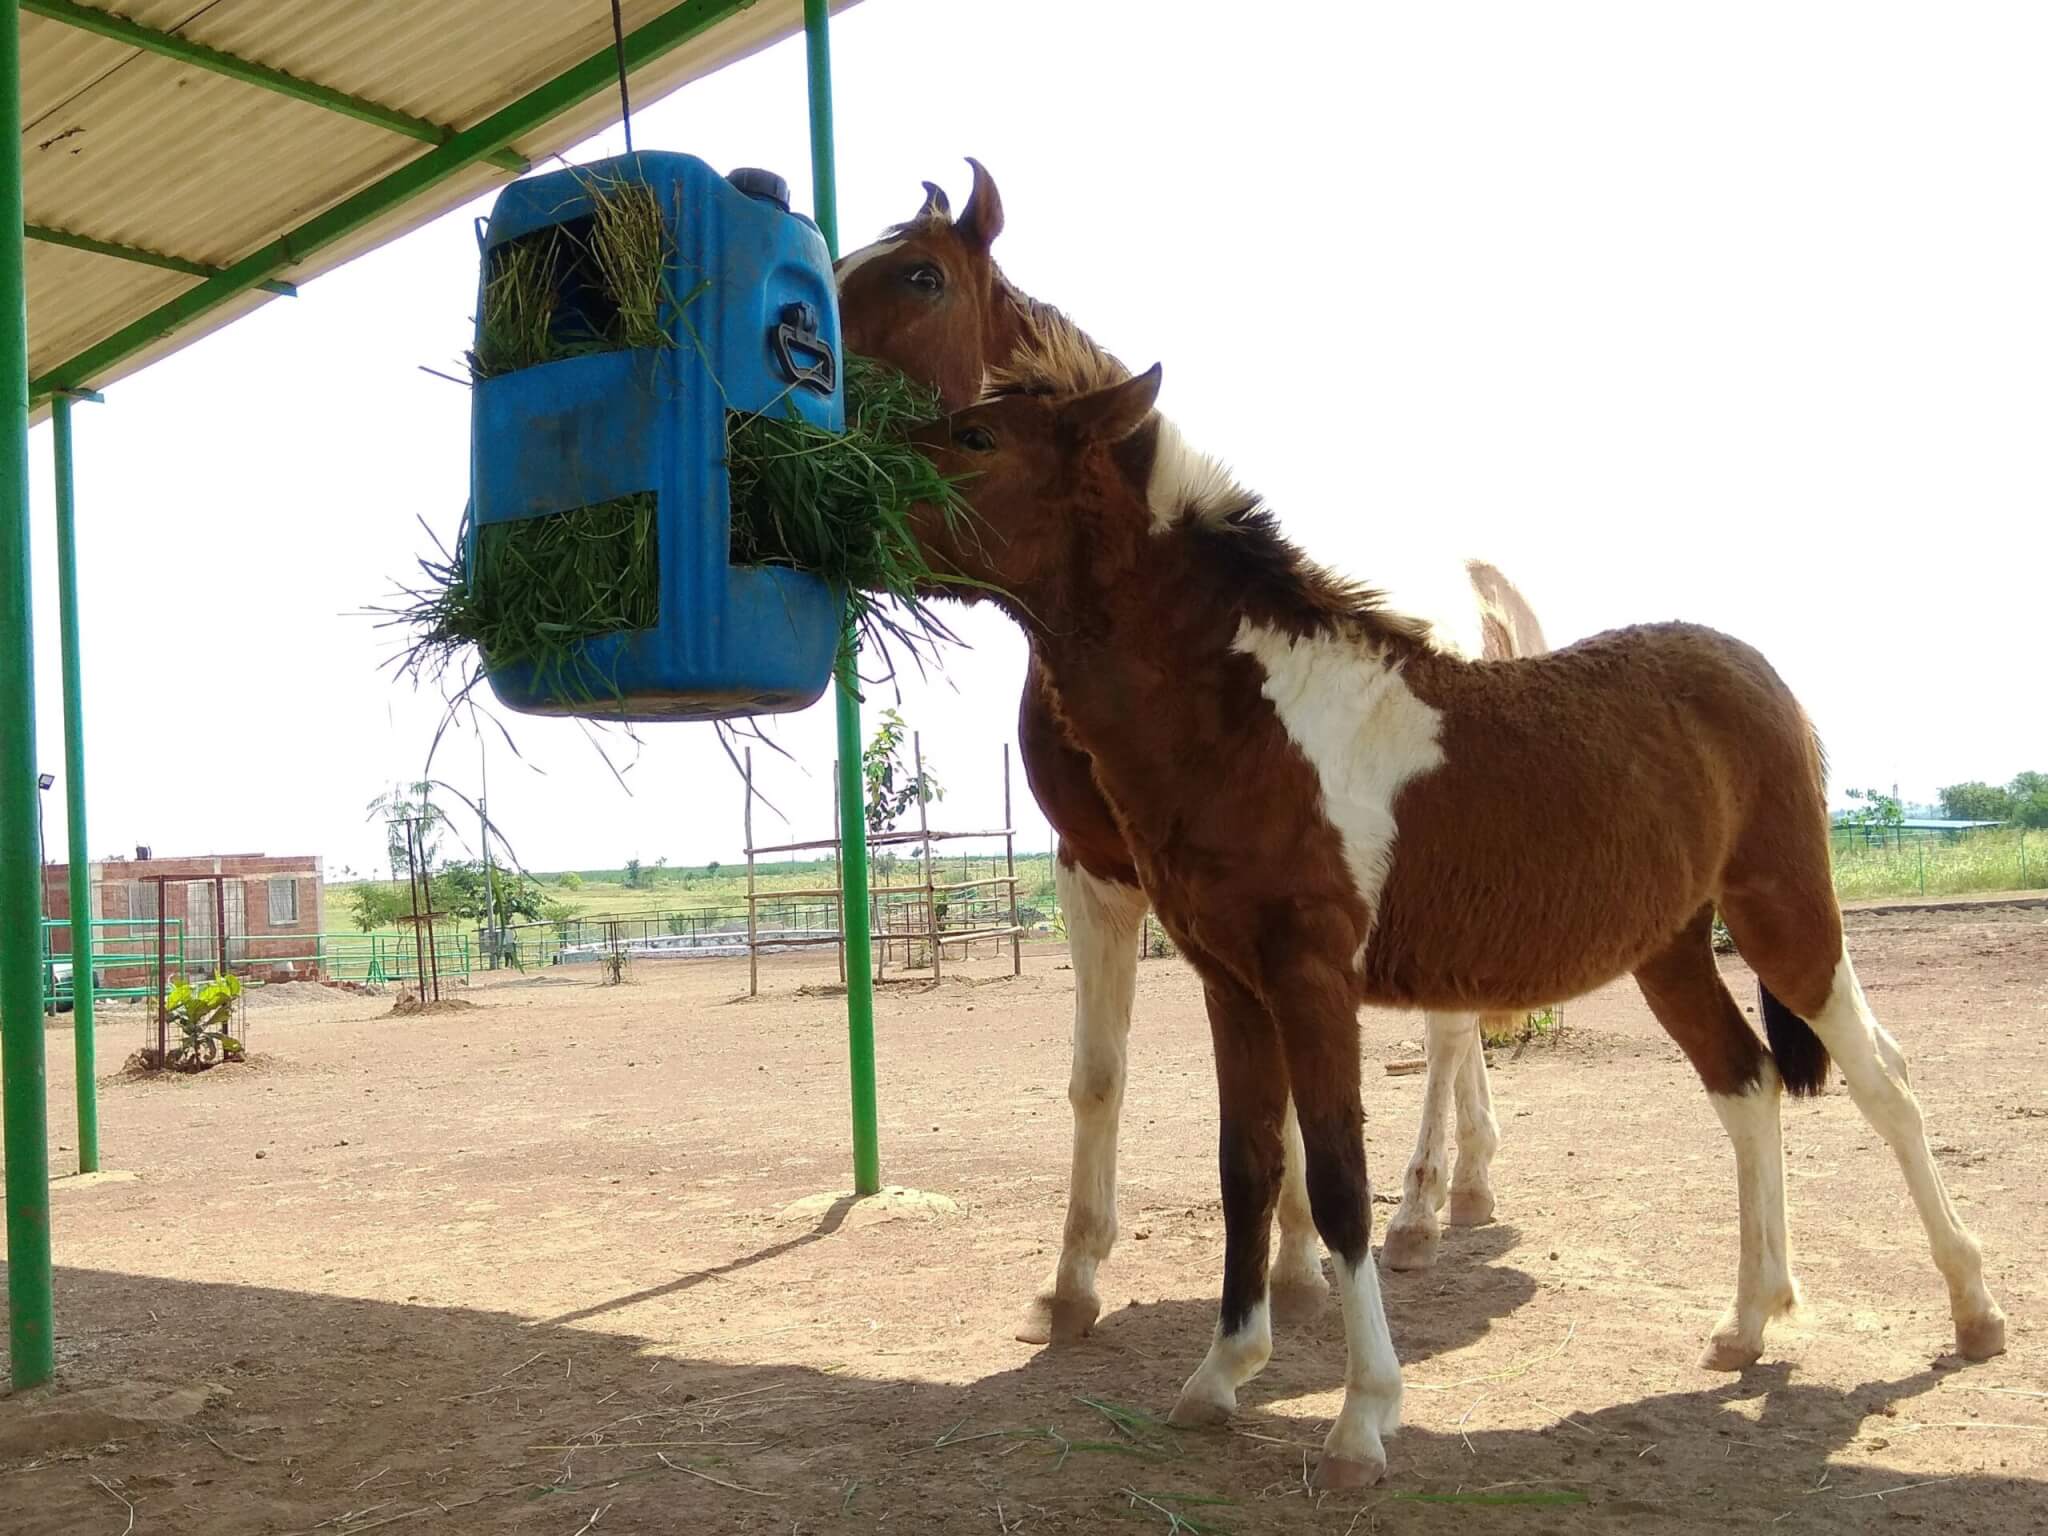 A rescued horse and pony work to get fresh, green grass out of an enrichment device.